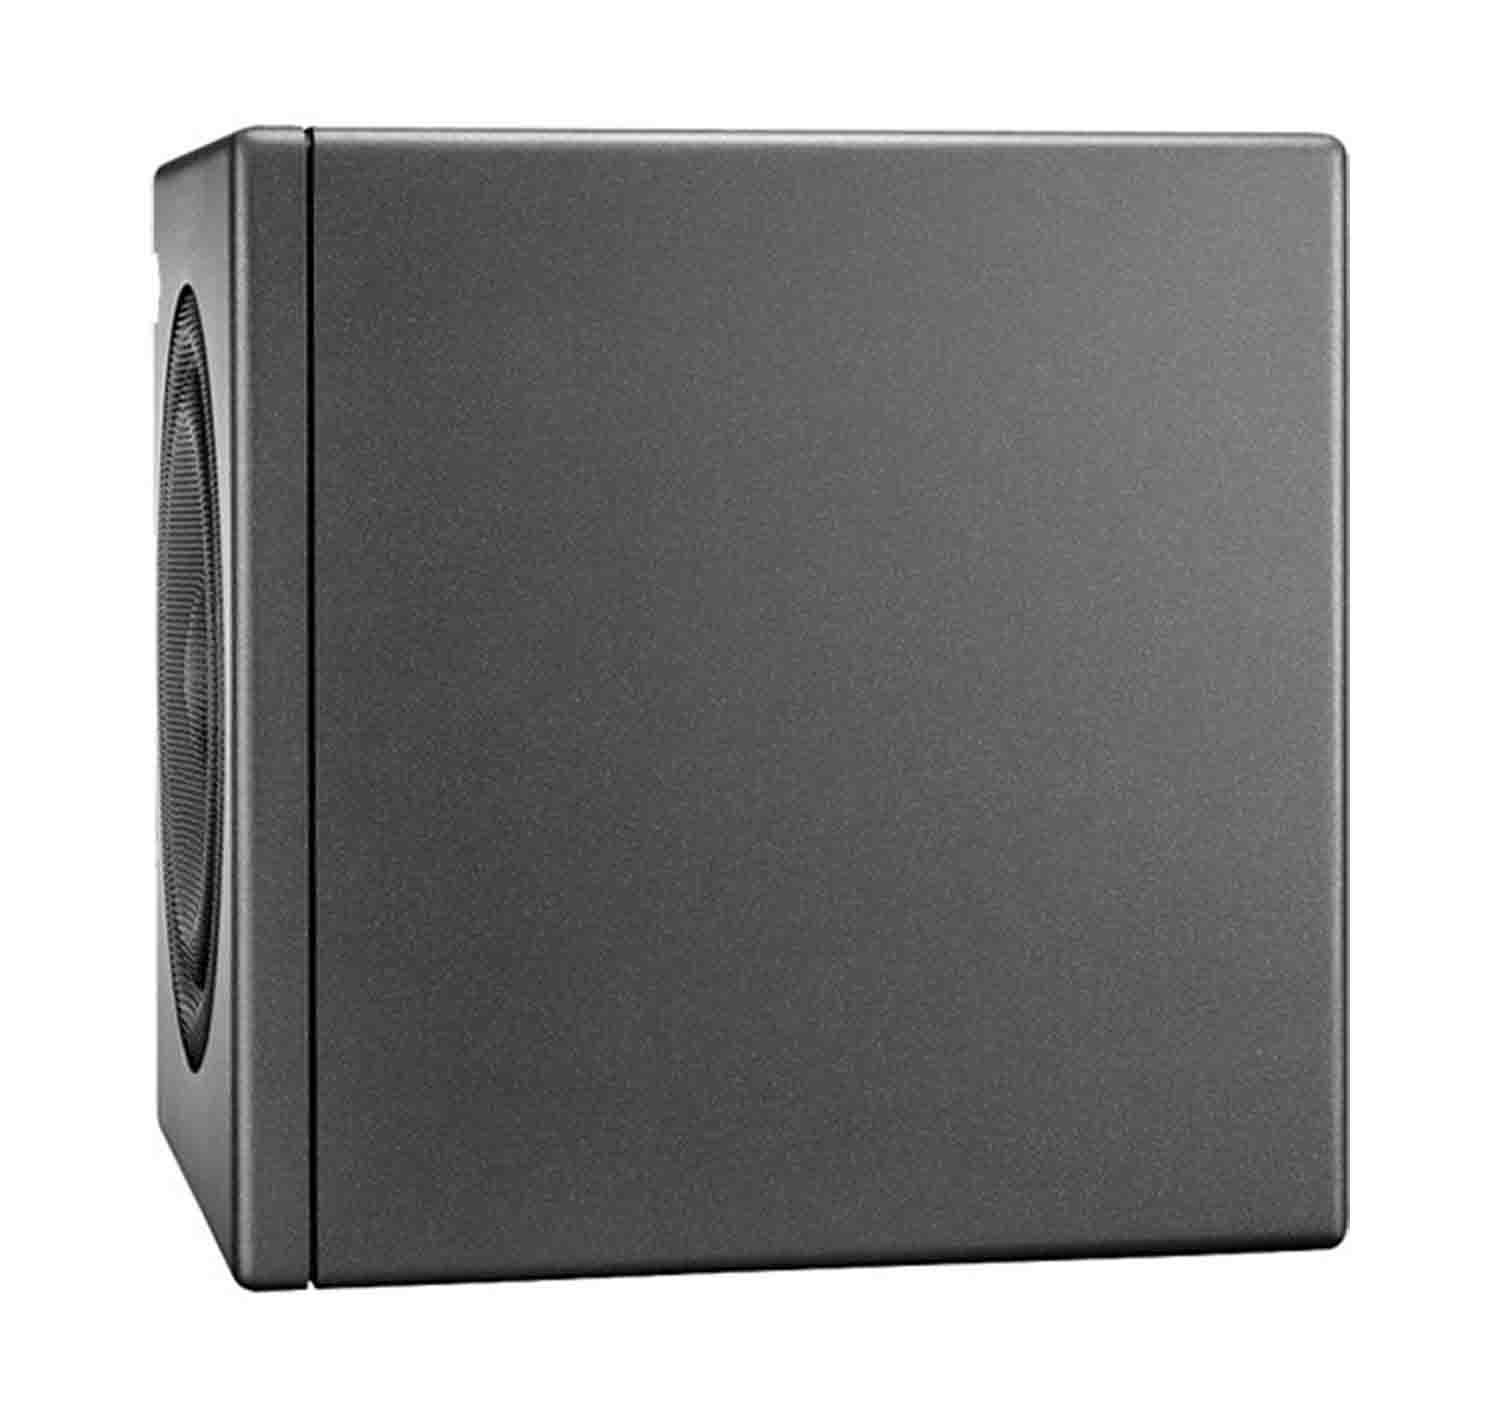 Neumann KH 750 AES67 Compact DSP-Controlled Closed-Cabinet Subwoofer - Hollywood DJ